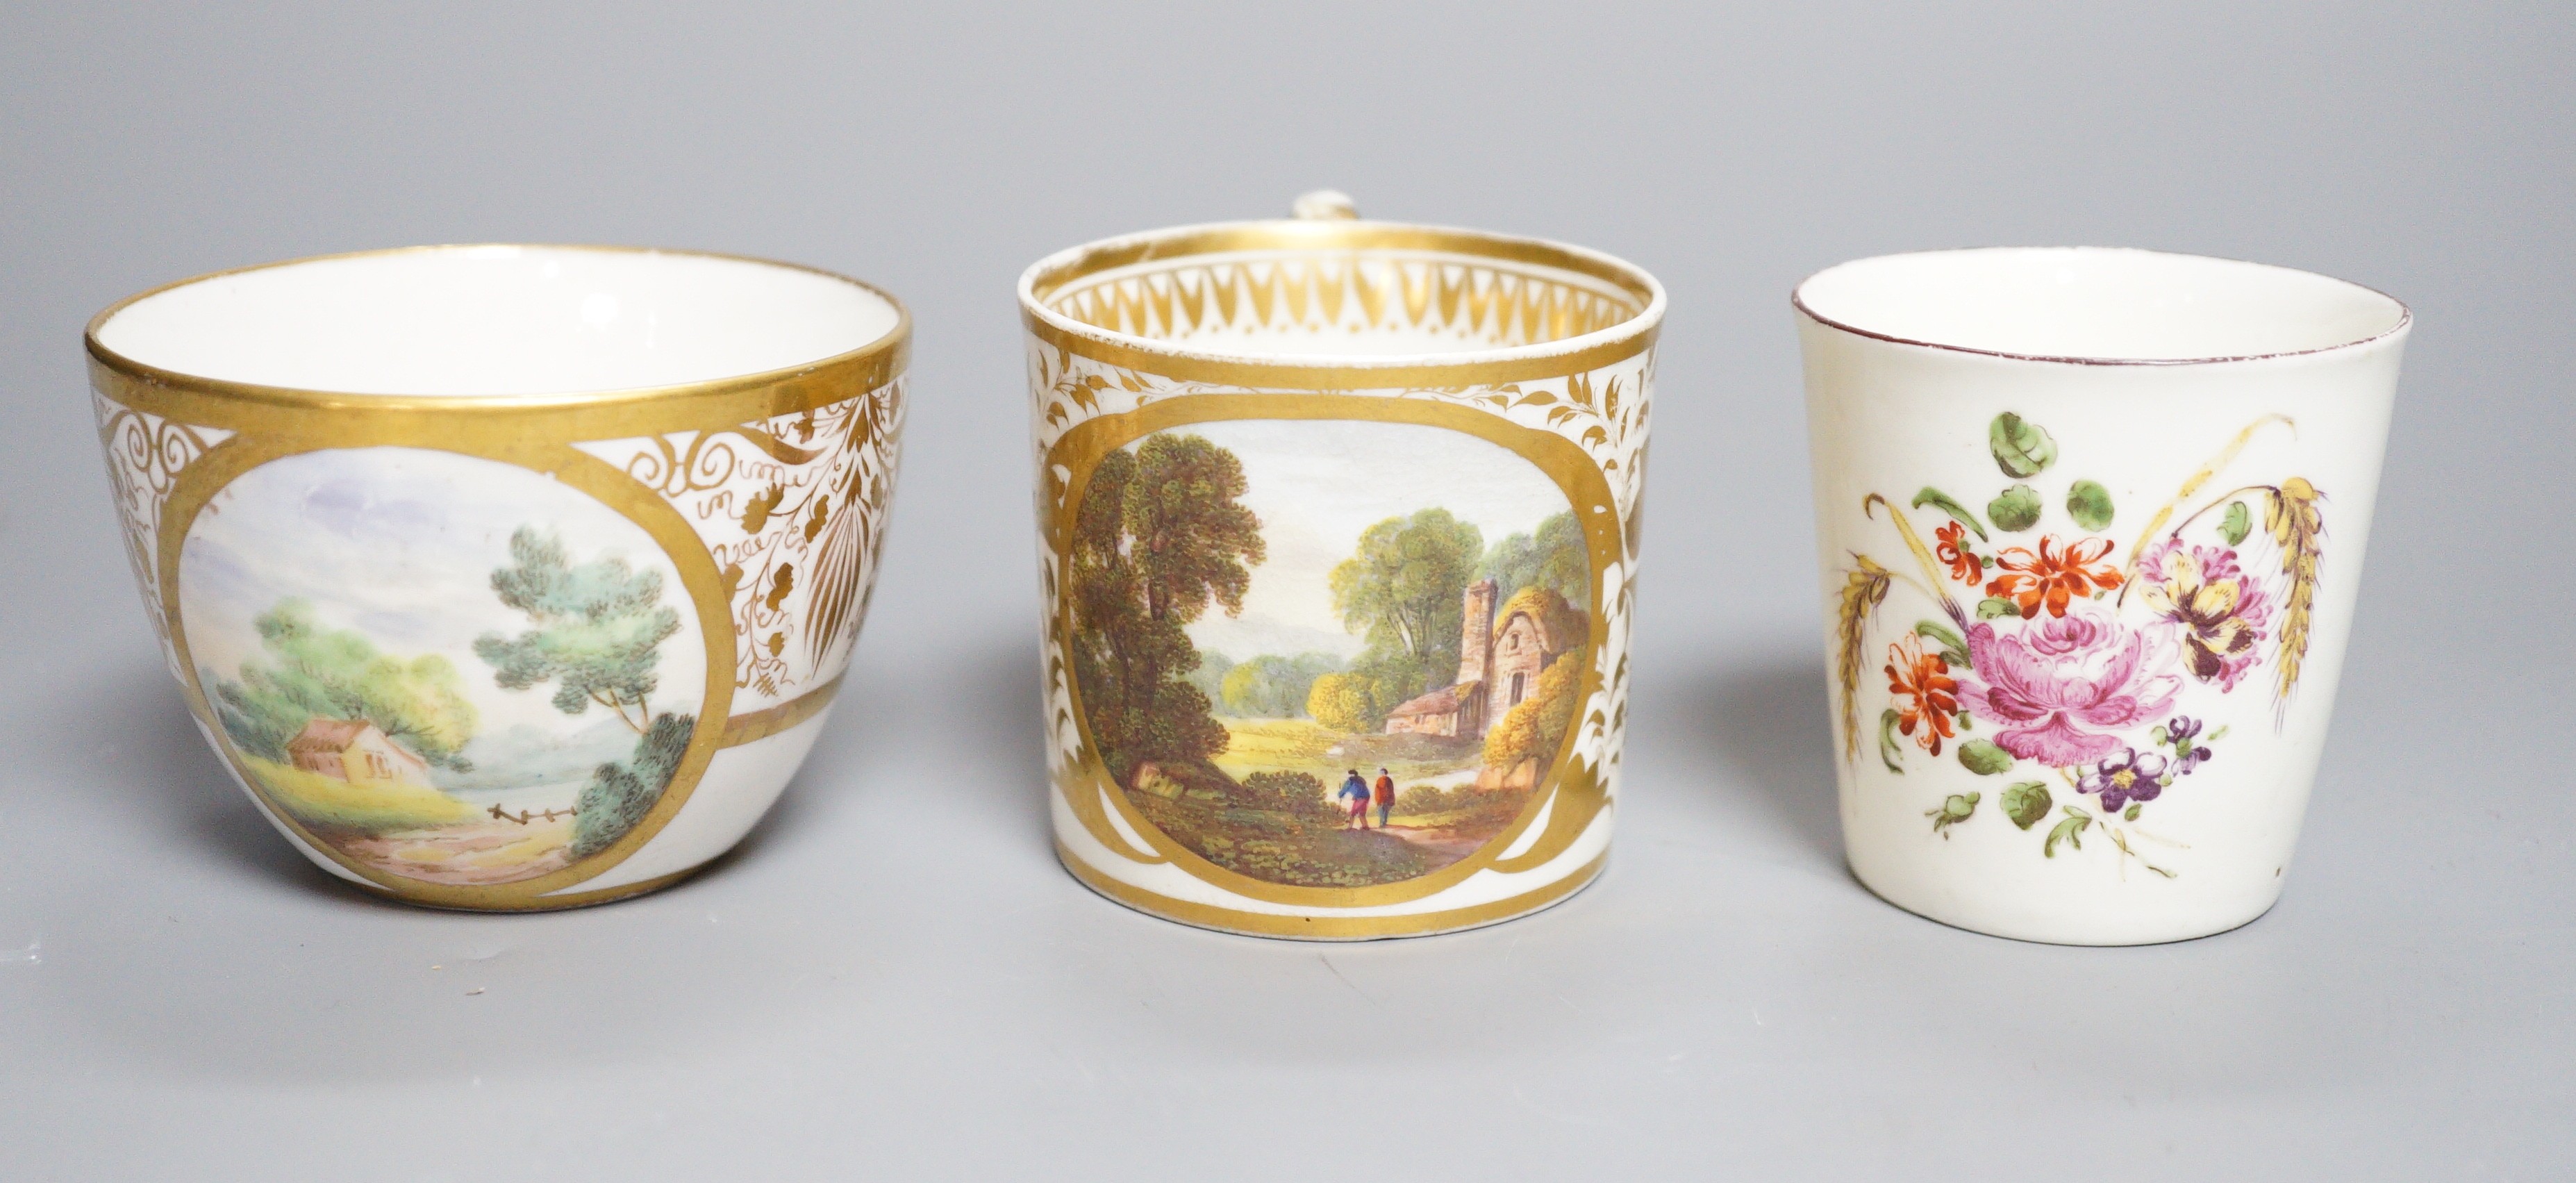 An 18th century miniature porcelain tumbler, probably Derby, a Derby coffee can and a Bute-shape coffee cup